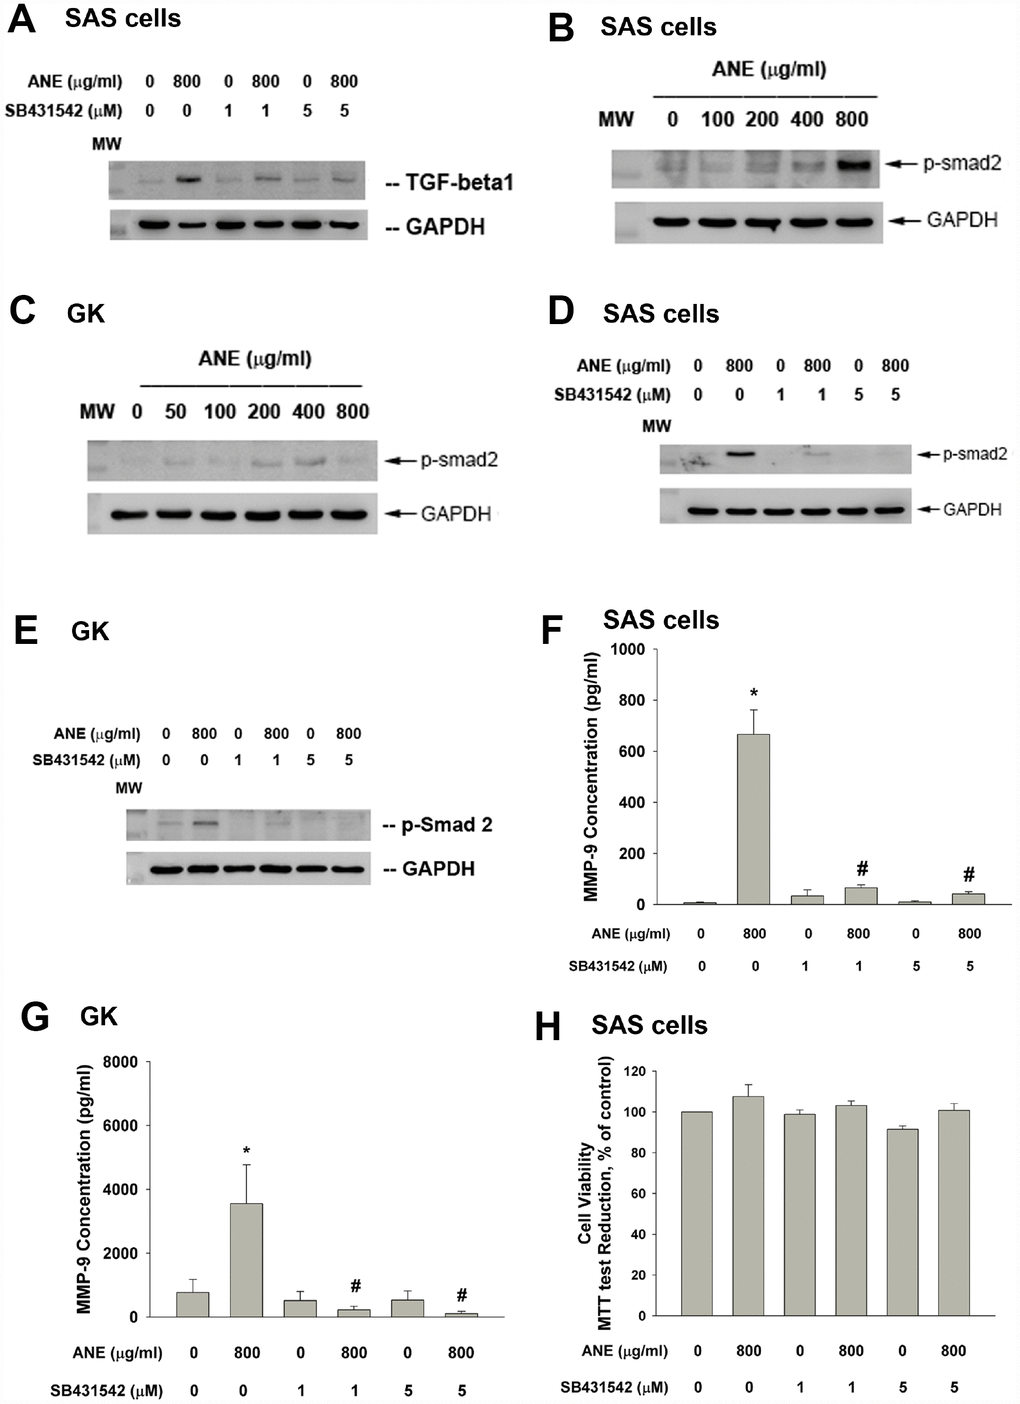 Role of TGF-β and Smad2 signaling on ANE-induced MMP-9 expression/secretion of oral epithelial cells. (A) Stimulation of TGF-β protein expression of SAS cells by ANE (800 μg/ml) and its attenuation by SB431542 (1 and 5 μM), (B) ANE (100-800 μg/ml) stimulated Smad2 phosphorylation of SAS cells after 24-hr of exposure, (C) ANE (50-800 μg/ml) stimulated Smad2 phosphorylation of GK after 24-hr of exposure, (D) SB431542 (1 and 5 μM) attenuated the ANE (800 μg/ml)-induced p-Smad2 expression of SAS cells, (E) SB431542 attenuated the ANE (800 μg/ml)-induced p-Smad2 expression of GK, (F) SB431542 prevented the ANE (800 μg/ml)-induced MMP-9 secretion of SAS cells, (G) SB431542 prevented the ANE (800 μg/ml)-induced MMP-9 secretion of GK, (H) SB431542 showed little effect on ANE (800 μg/ml)-induced cytotoxicity of SAS cells (as % of control, 100%). *denotes statistically significant difference when compared with control. #denotes statistically significant difference when compared with ANE-treated group.